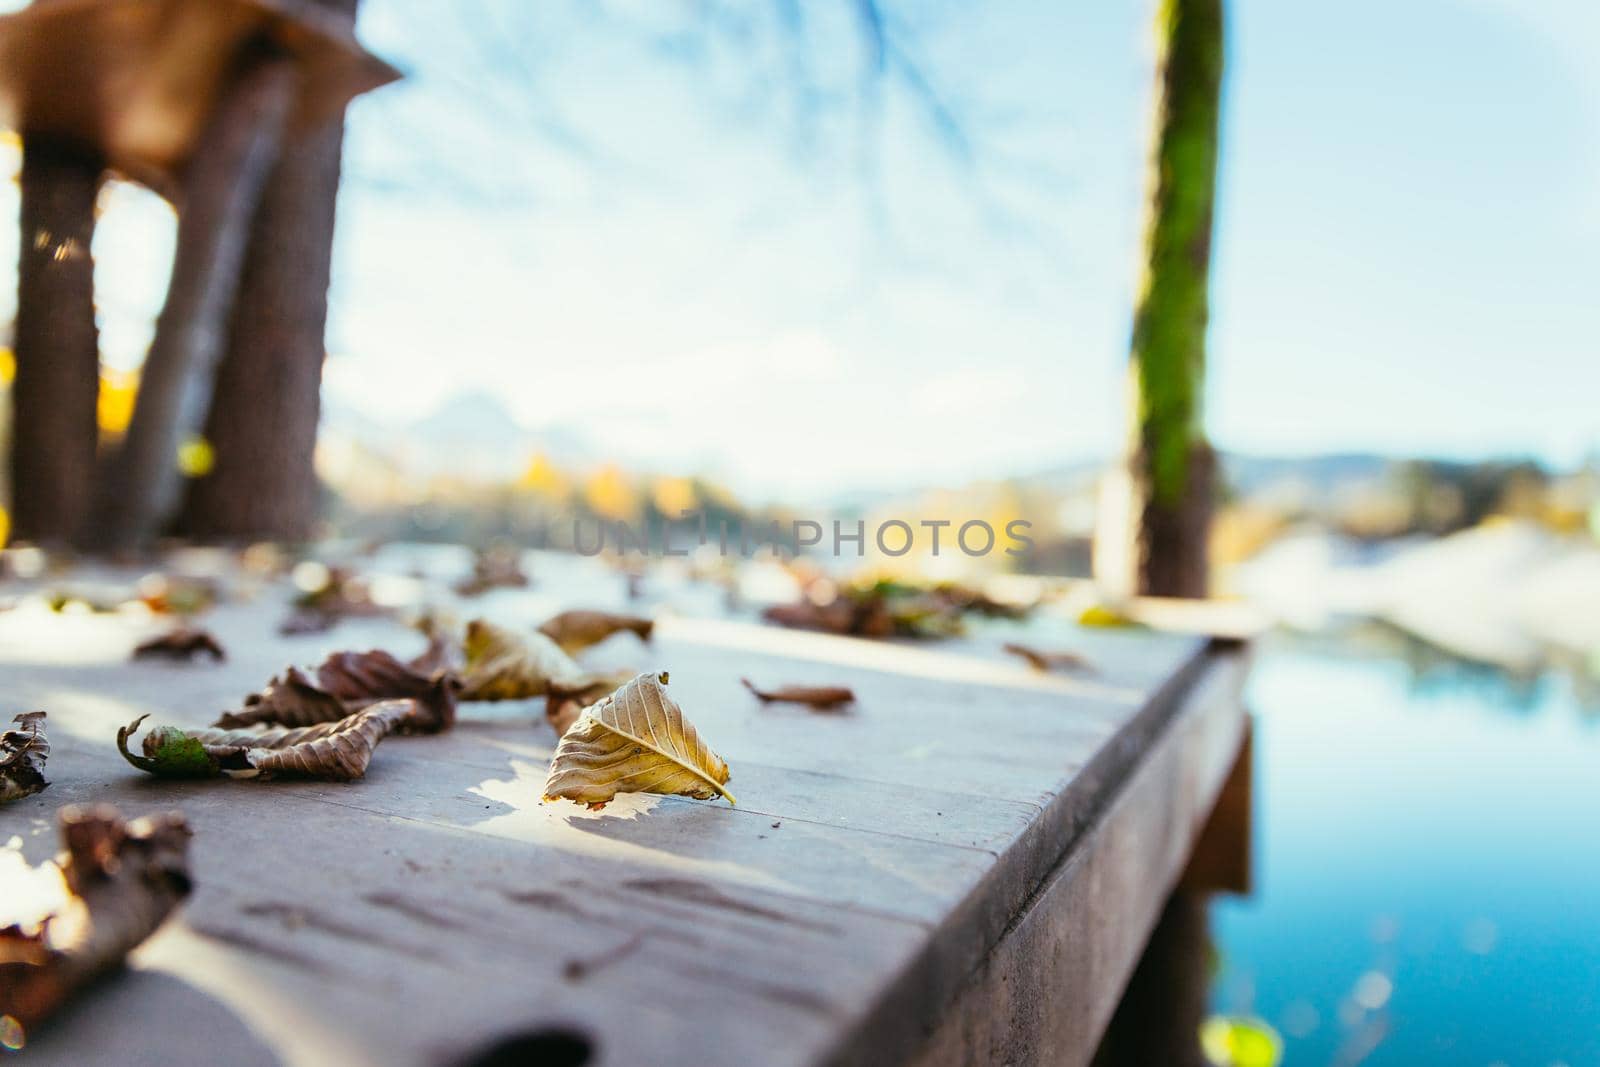 Colourful leaves lying on a footbridge, blurry autumn scenery in the background